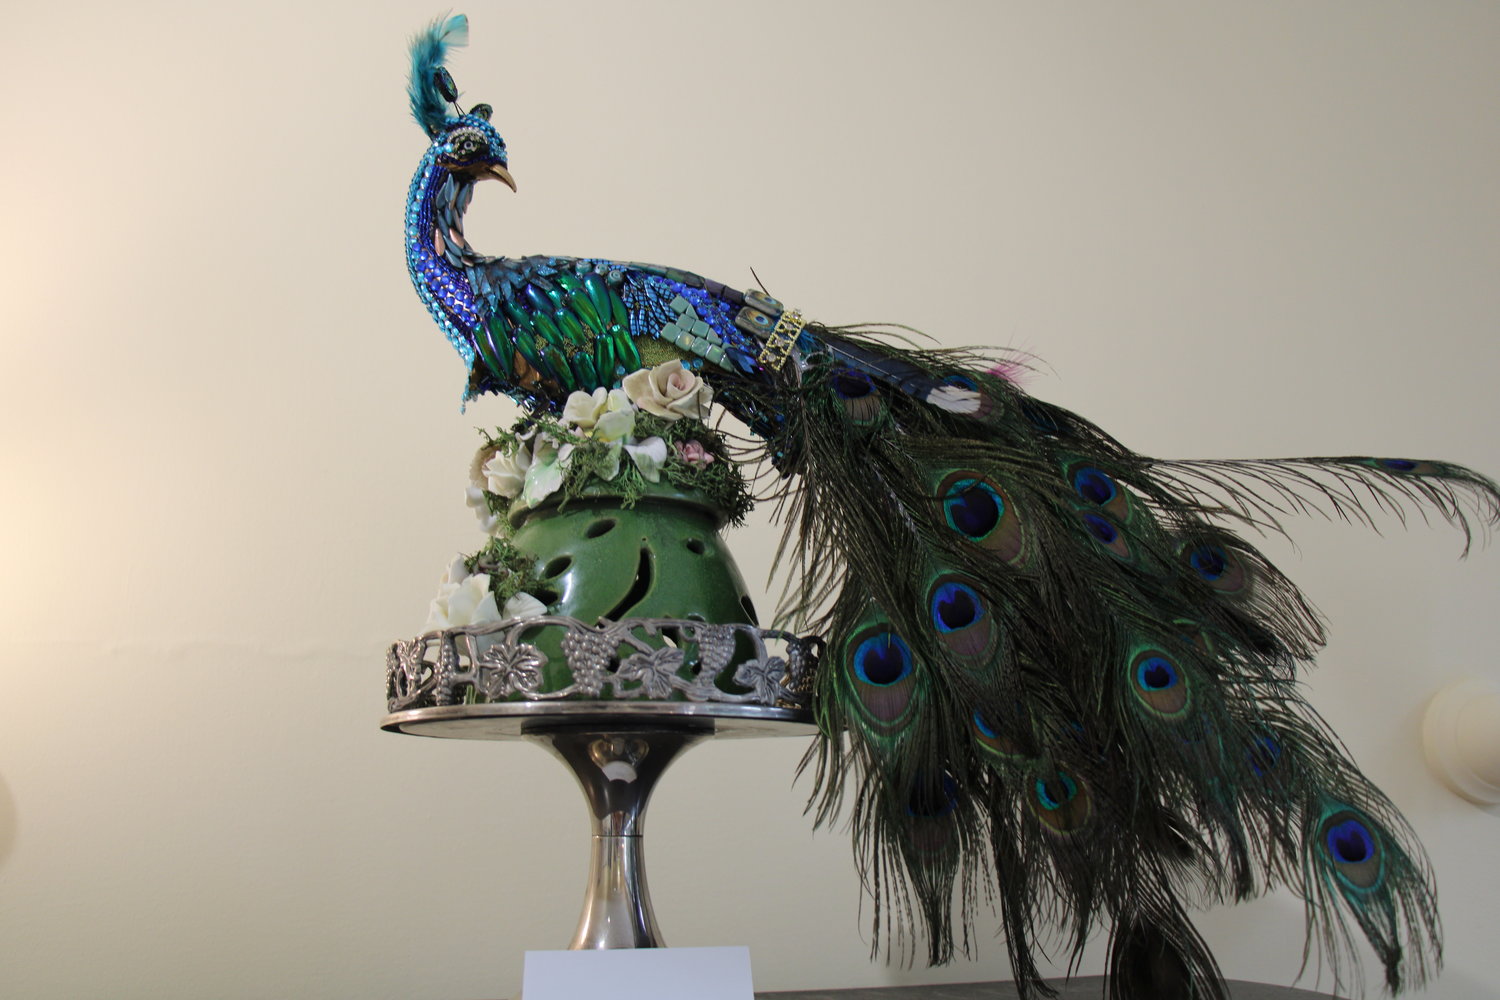 Captured for its beauty, the jeweled peacock is both a relic of the Gilded Age, but emblematic of individual modernity. 
“Inspiration Indigo” Eileen W. Palmer
Mixed media beaded sculpture.